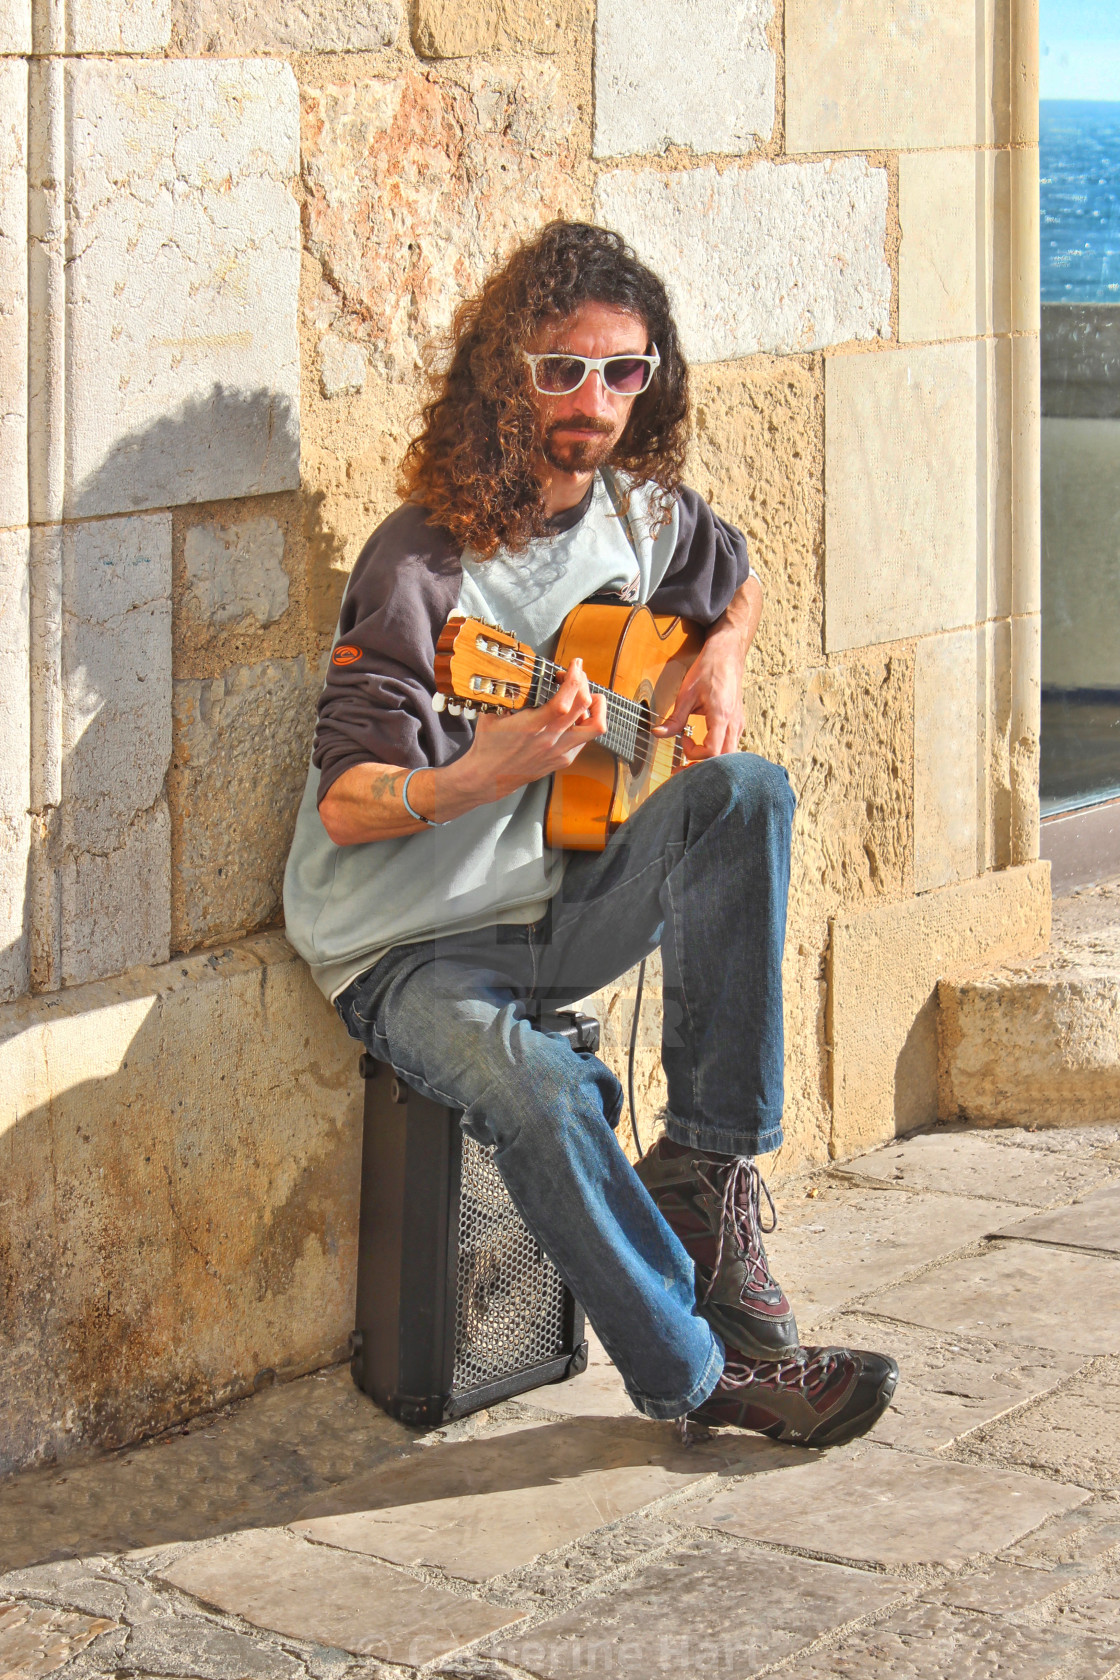 "Guitarist in the old town, Sitges" stock image